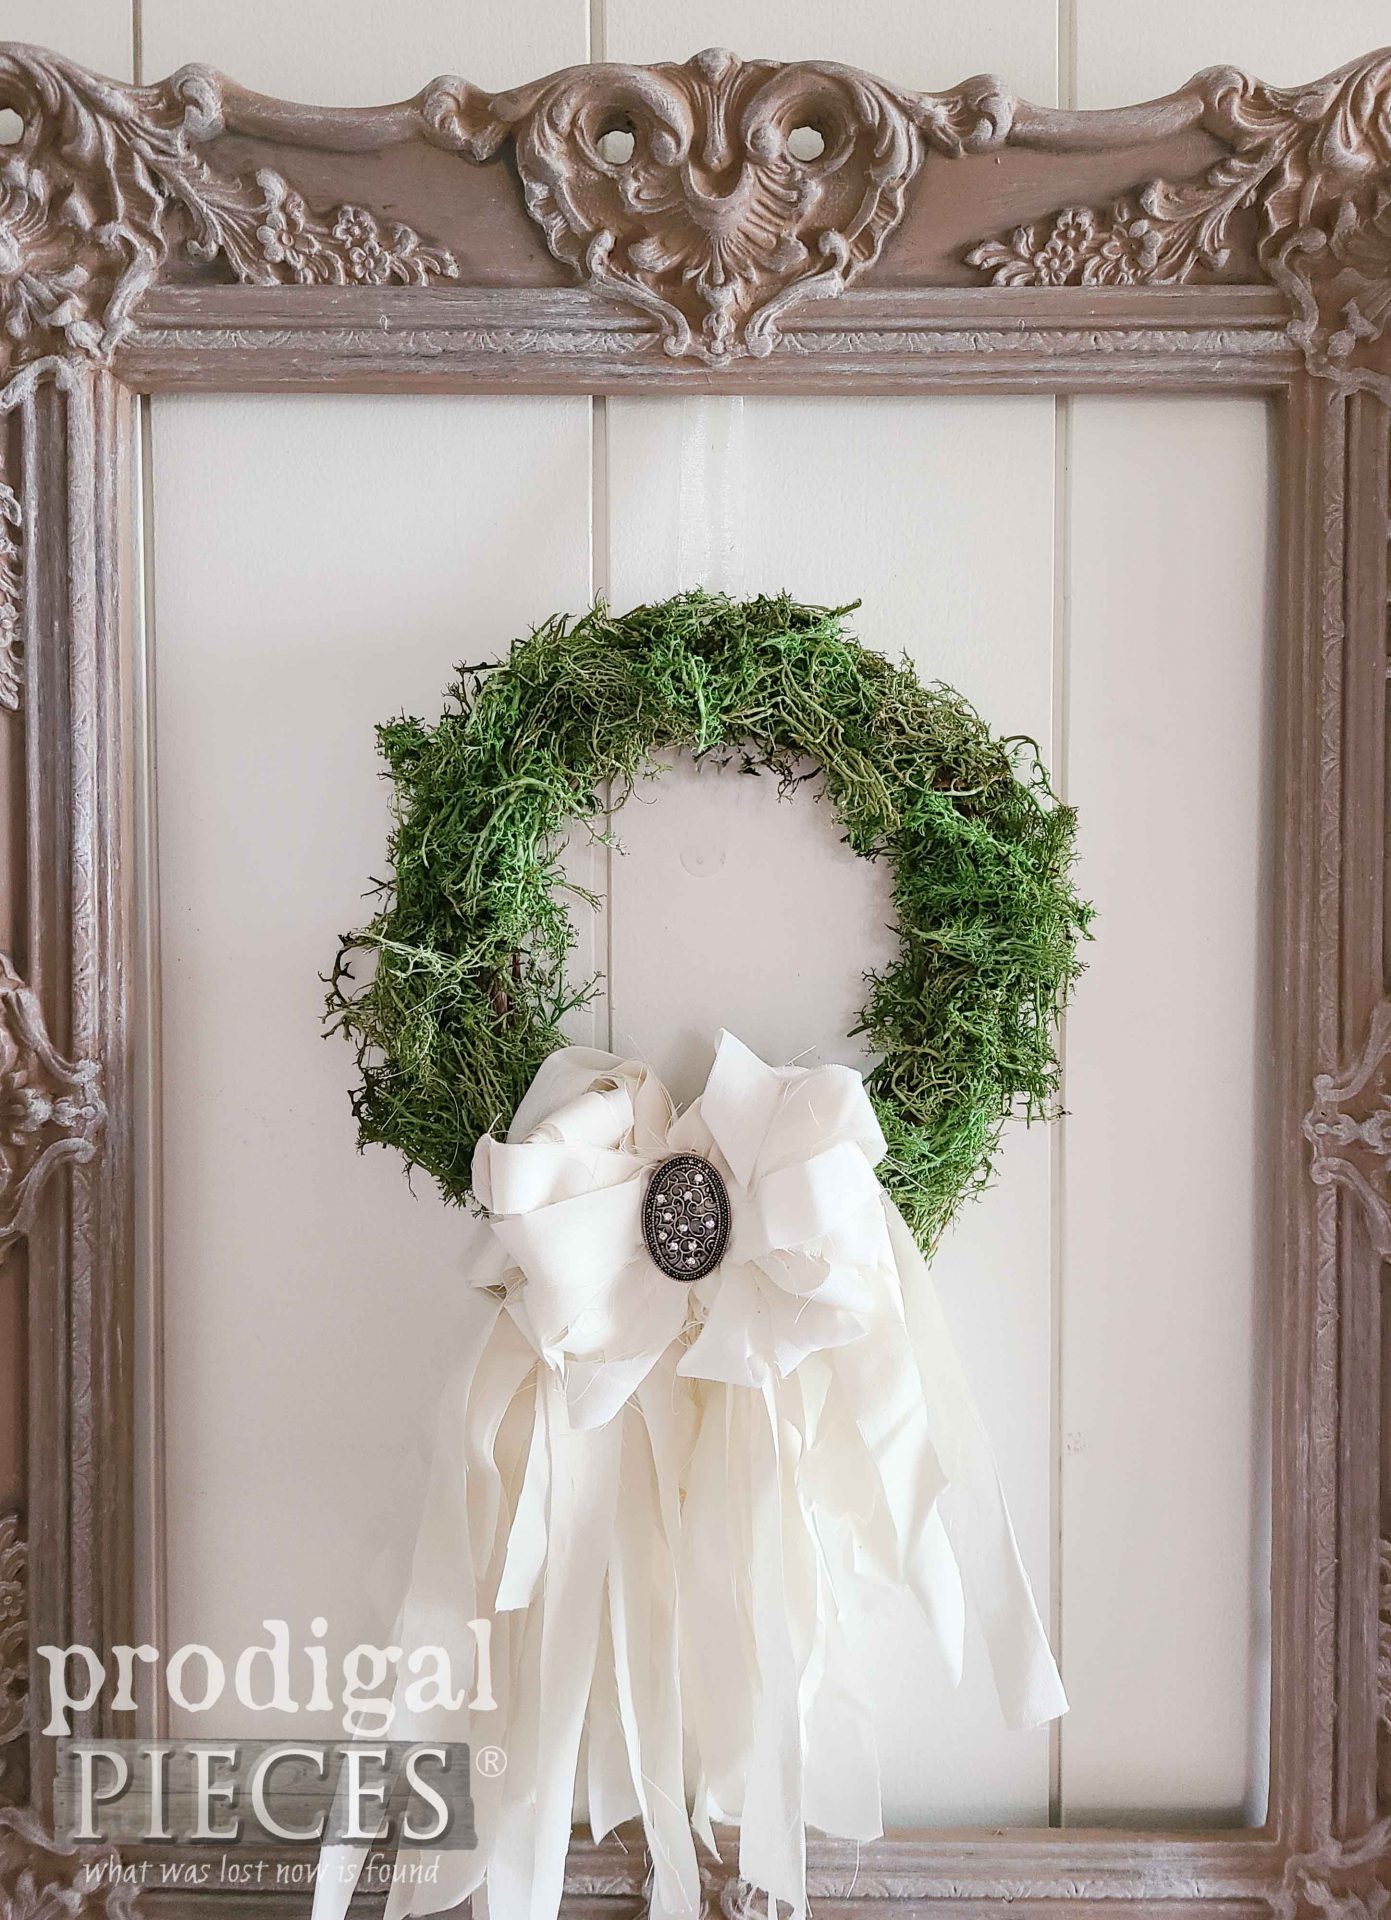 DIY Reindeer Moss Grapevine Wreath in Upcycled Ornate Frame by Larissa of Prodigal Pieces | prodigalpieces.com #prodigalpieces #diy #homedecor #farmhouse